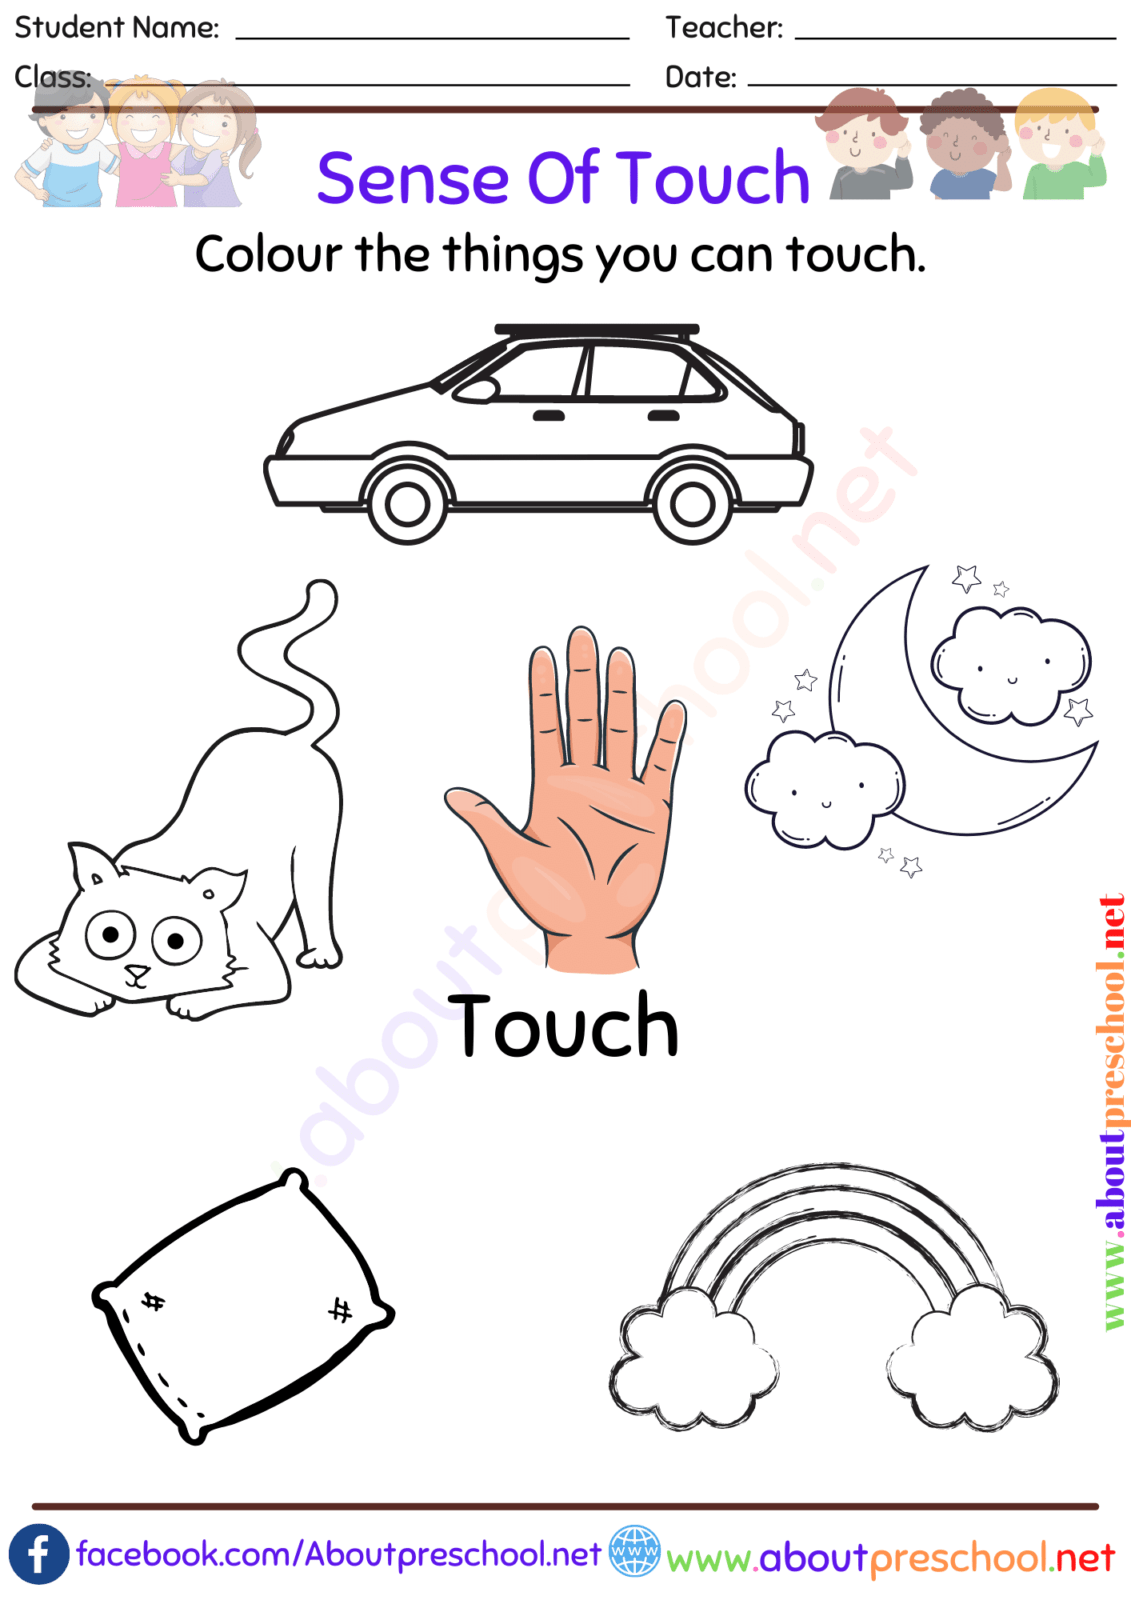 What Are The 5 Senses-Touch